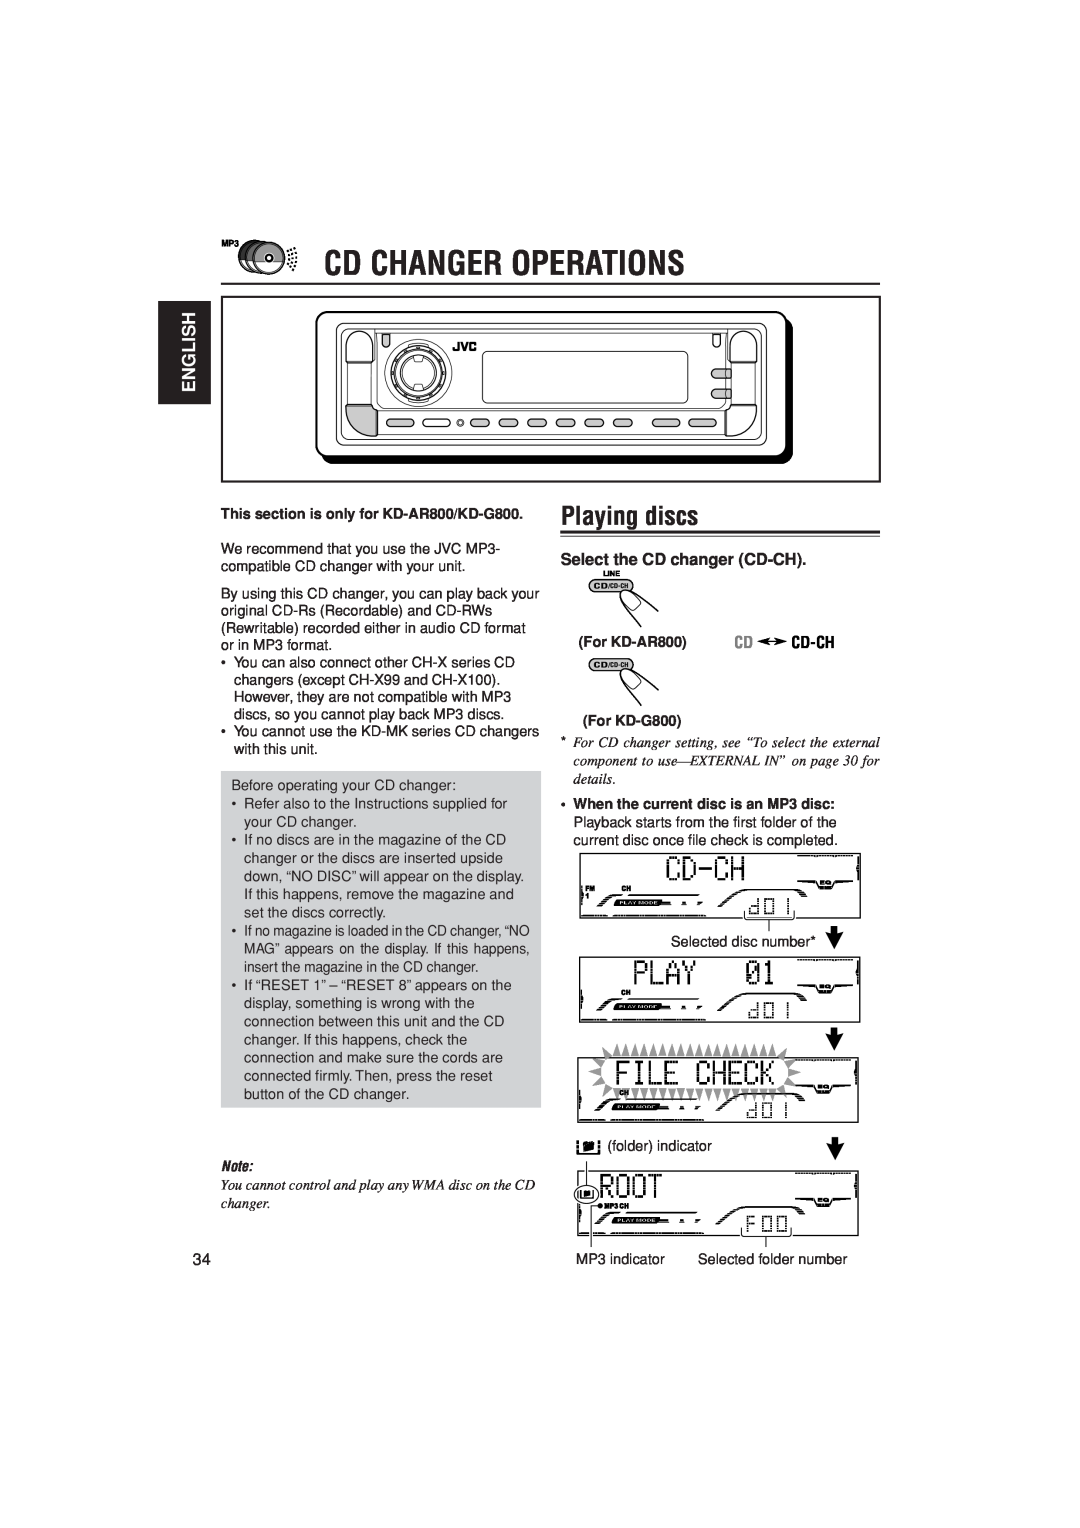 JVC KD-G700 manual Cd Changer Operations, Playing discs, Select the CD changer CD-CH, English, For KD-AR800, For KD-G800 